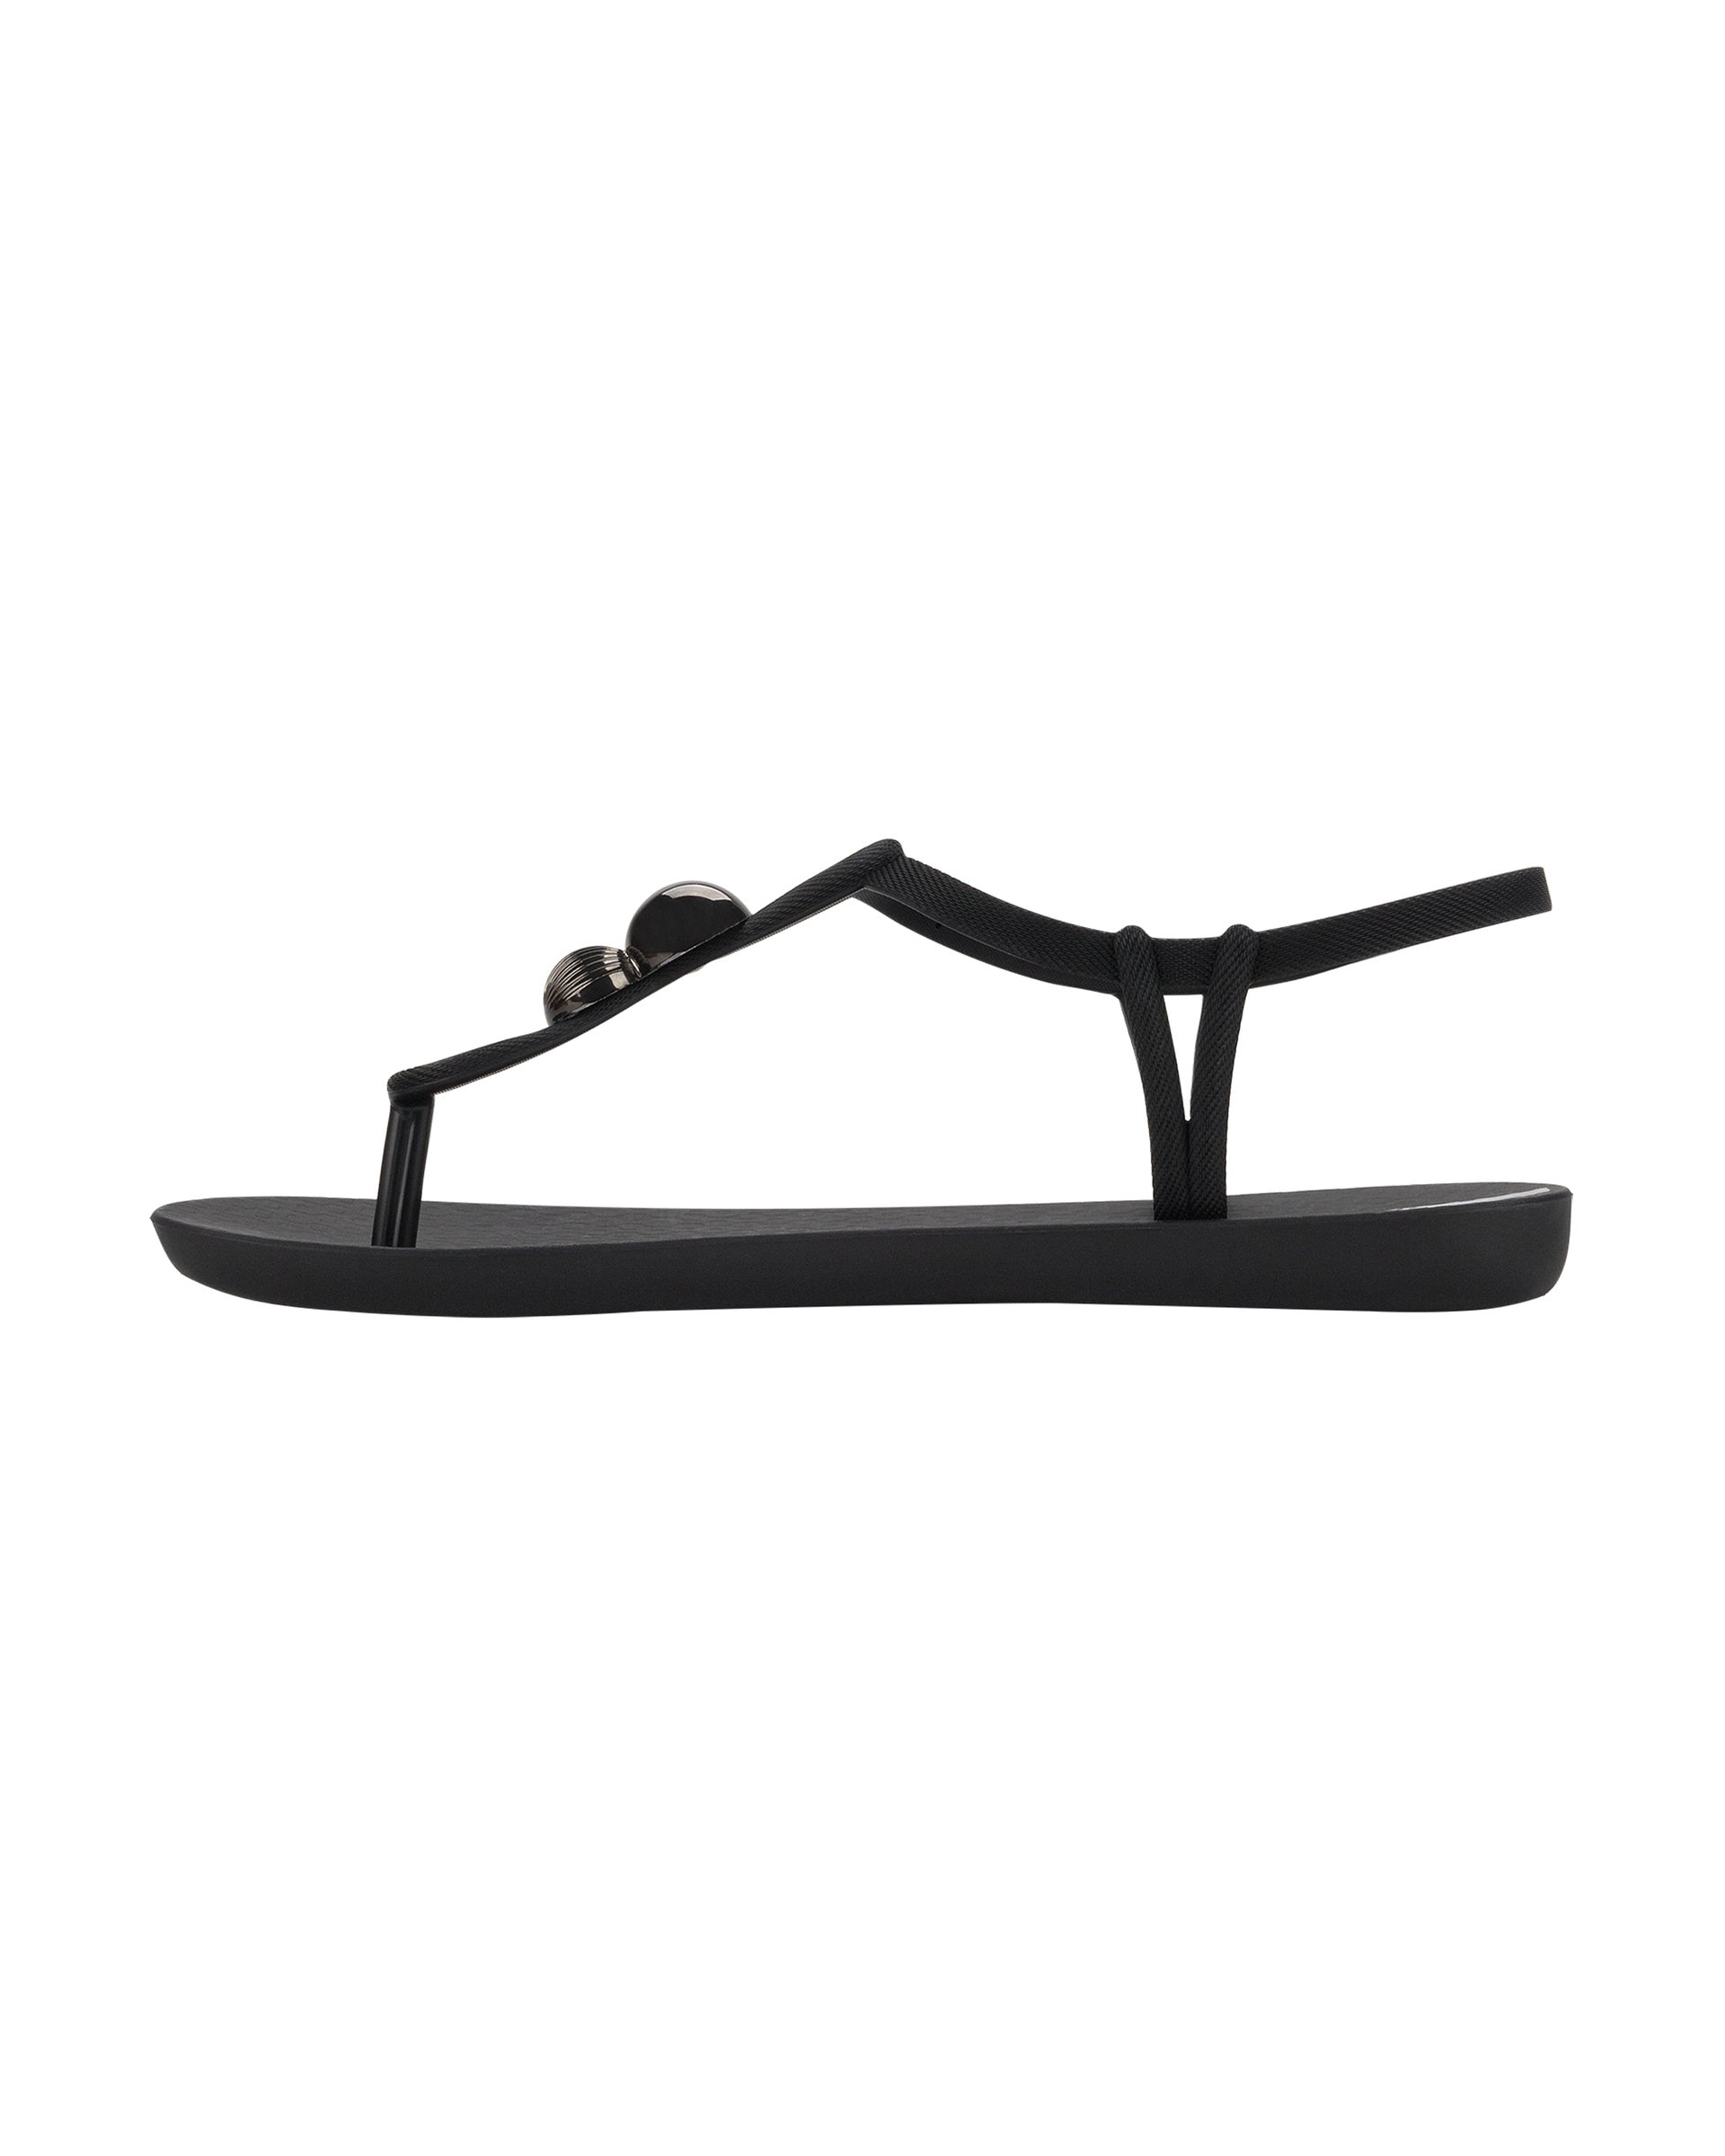 Inner side view of a black Ipanema Class Spheres women's t-strap sandal with metallic bauble.